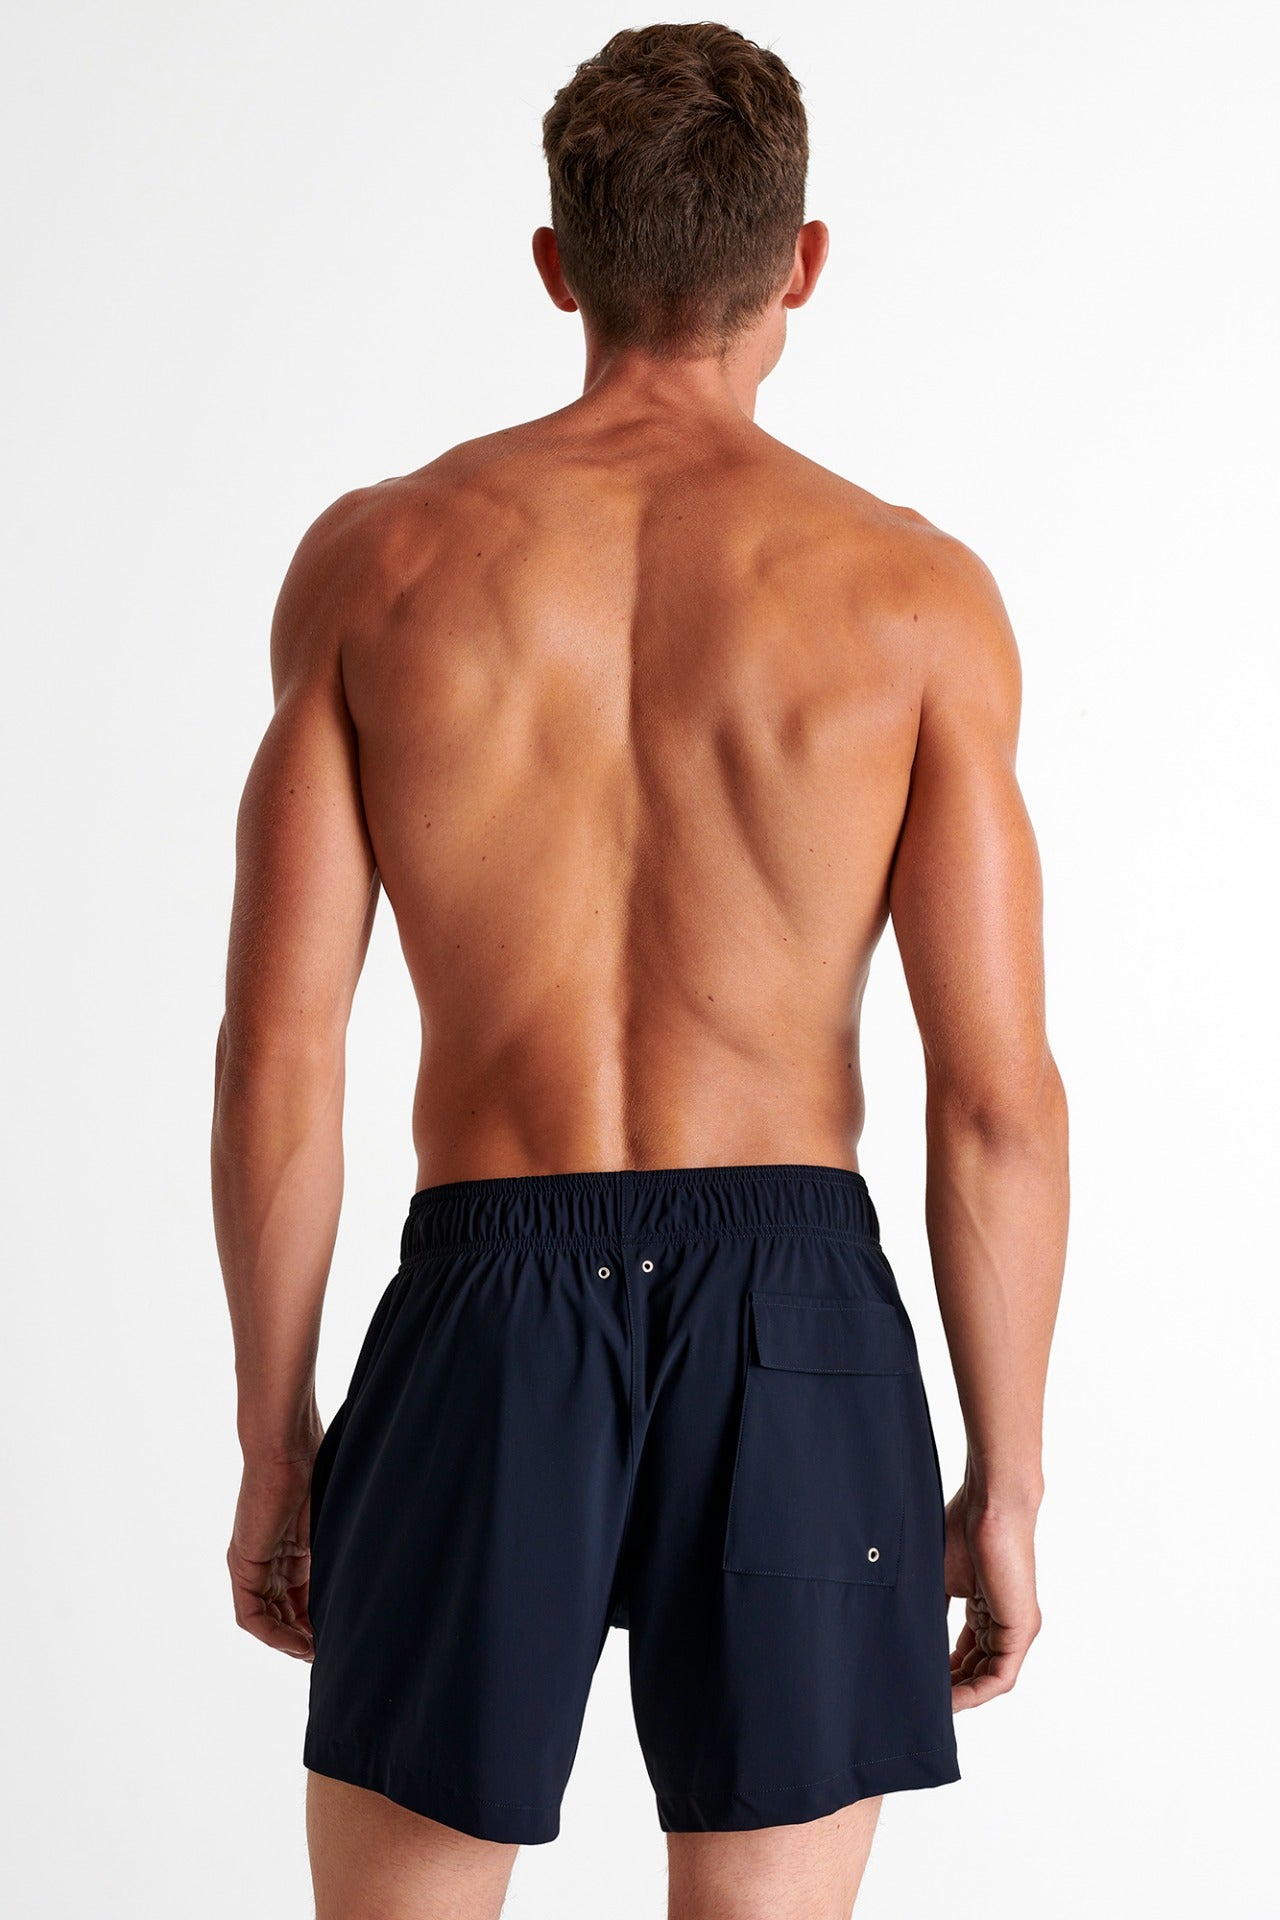 62245-30-590 - Classic Fit, Stretch And Quick Dry Swim Trunks S / 590 Navy